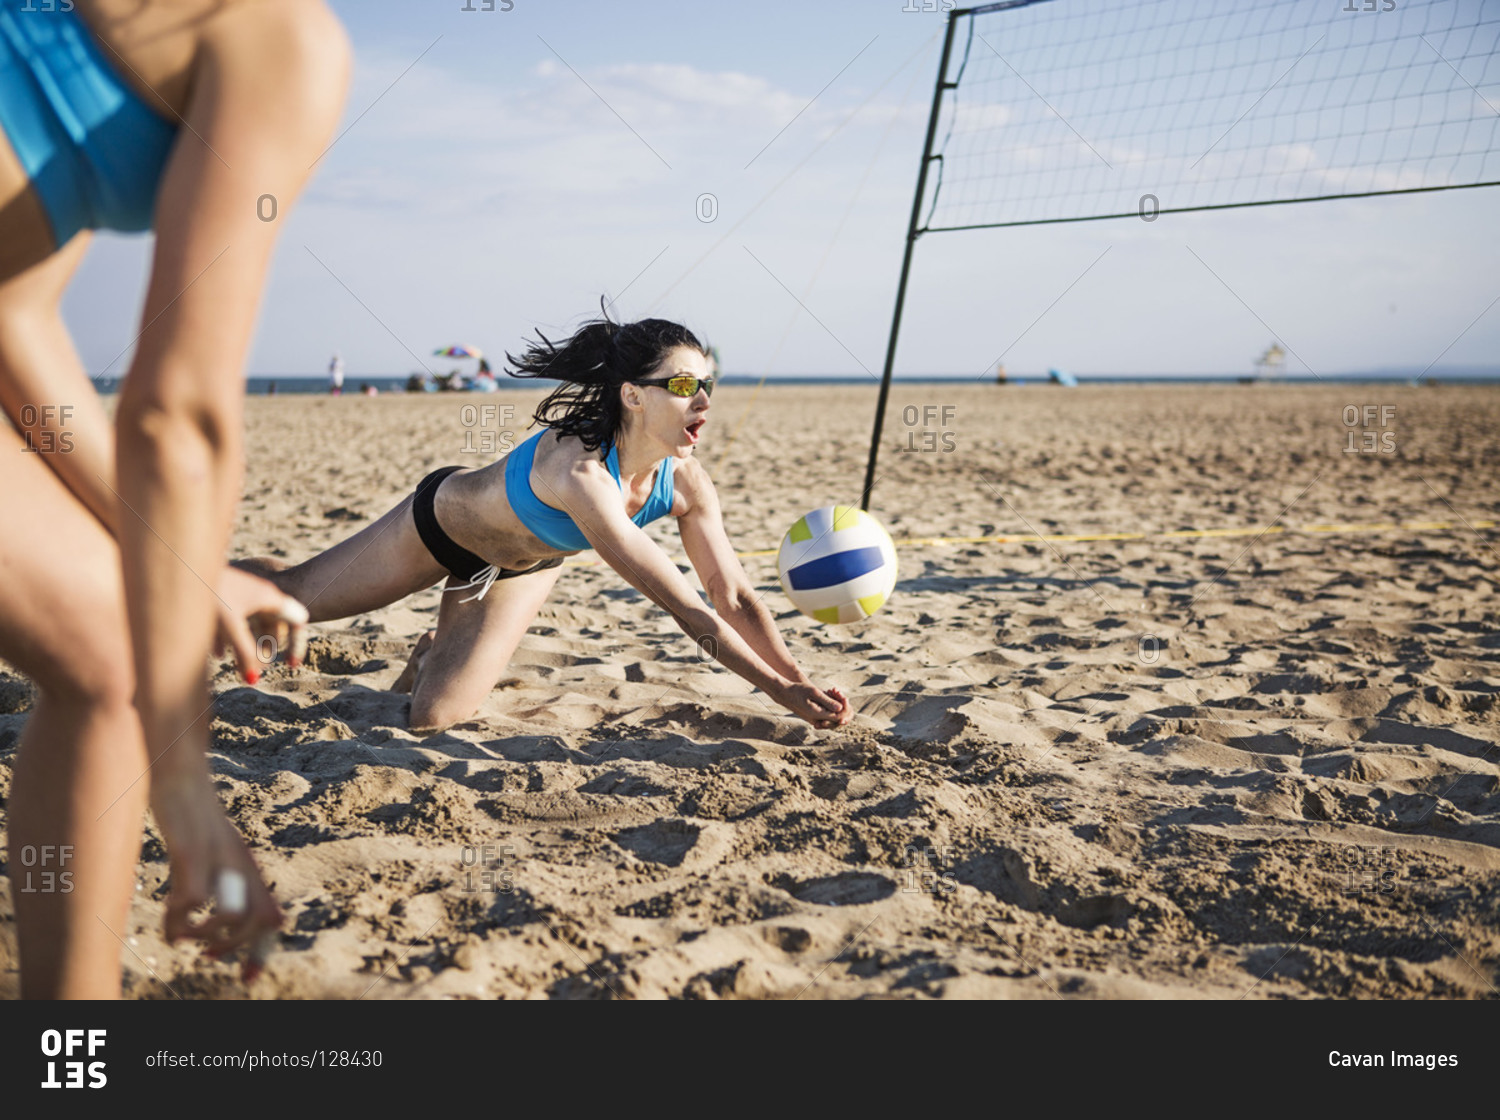 Beach volleyball player dives for a shot